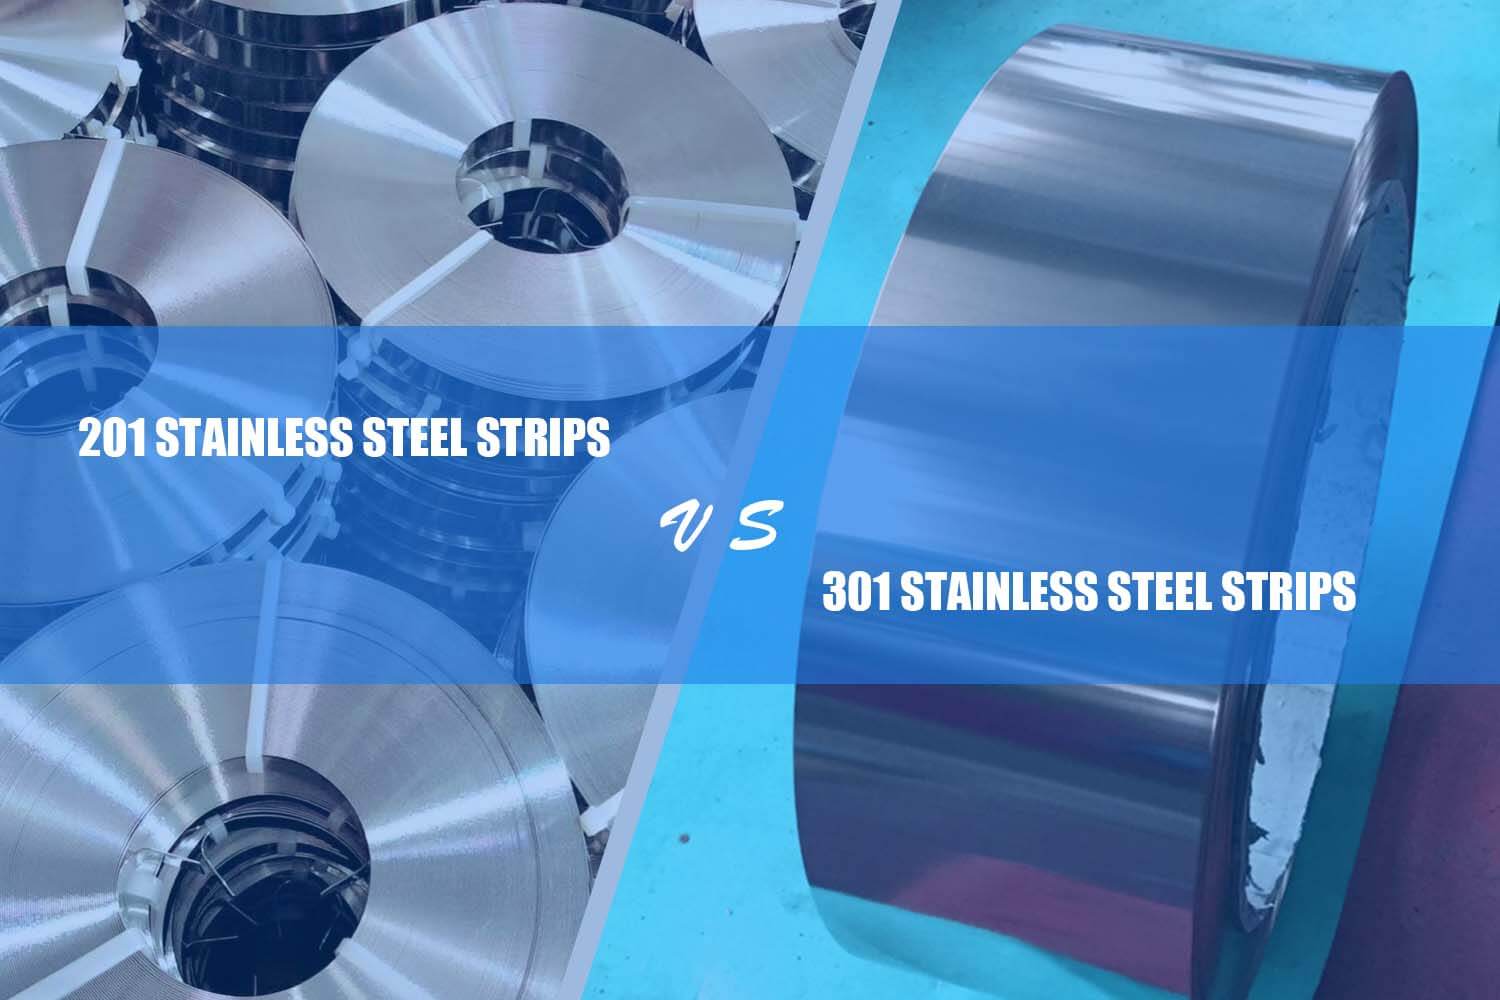 the difference between 201 and 301 stainless steel strip